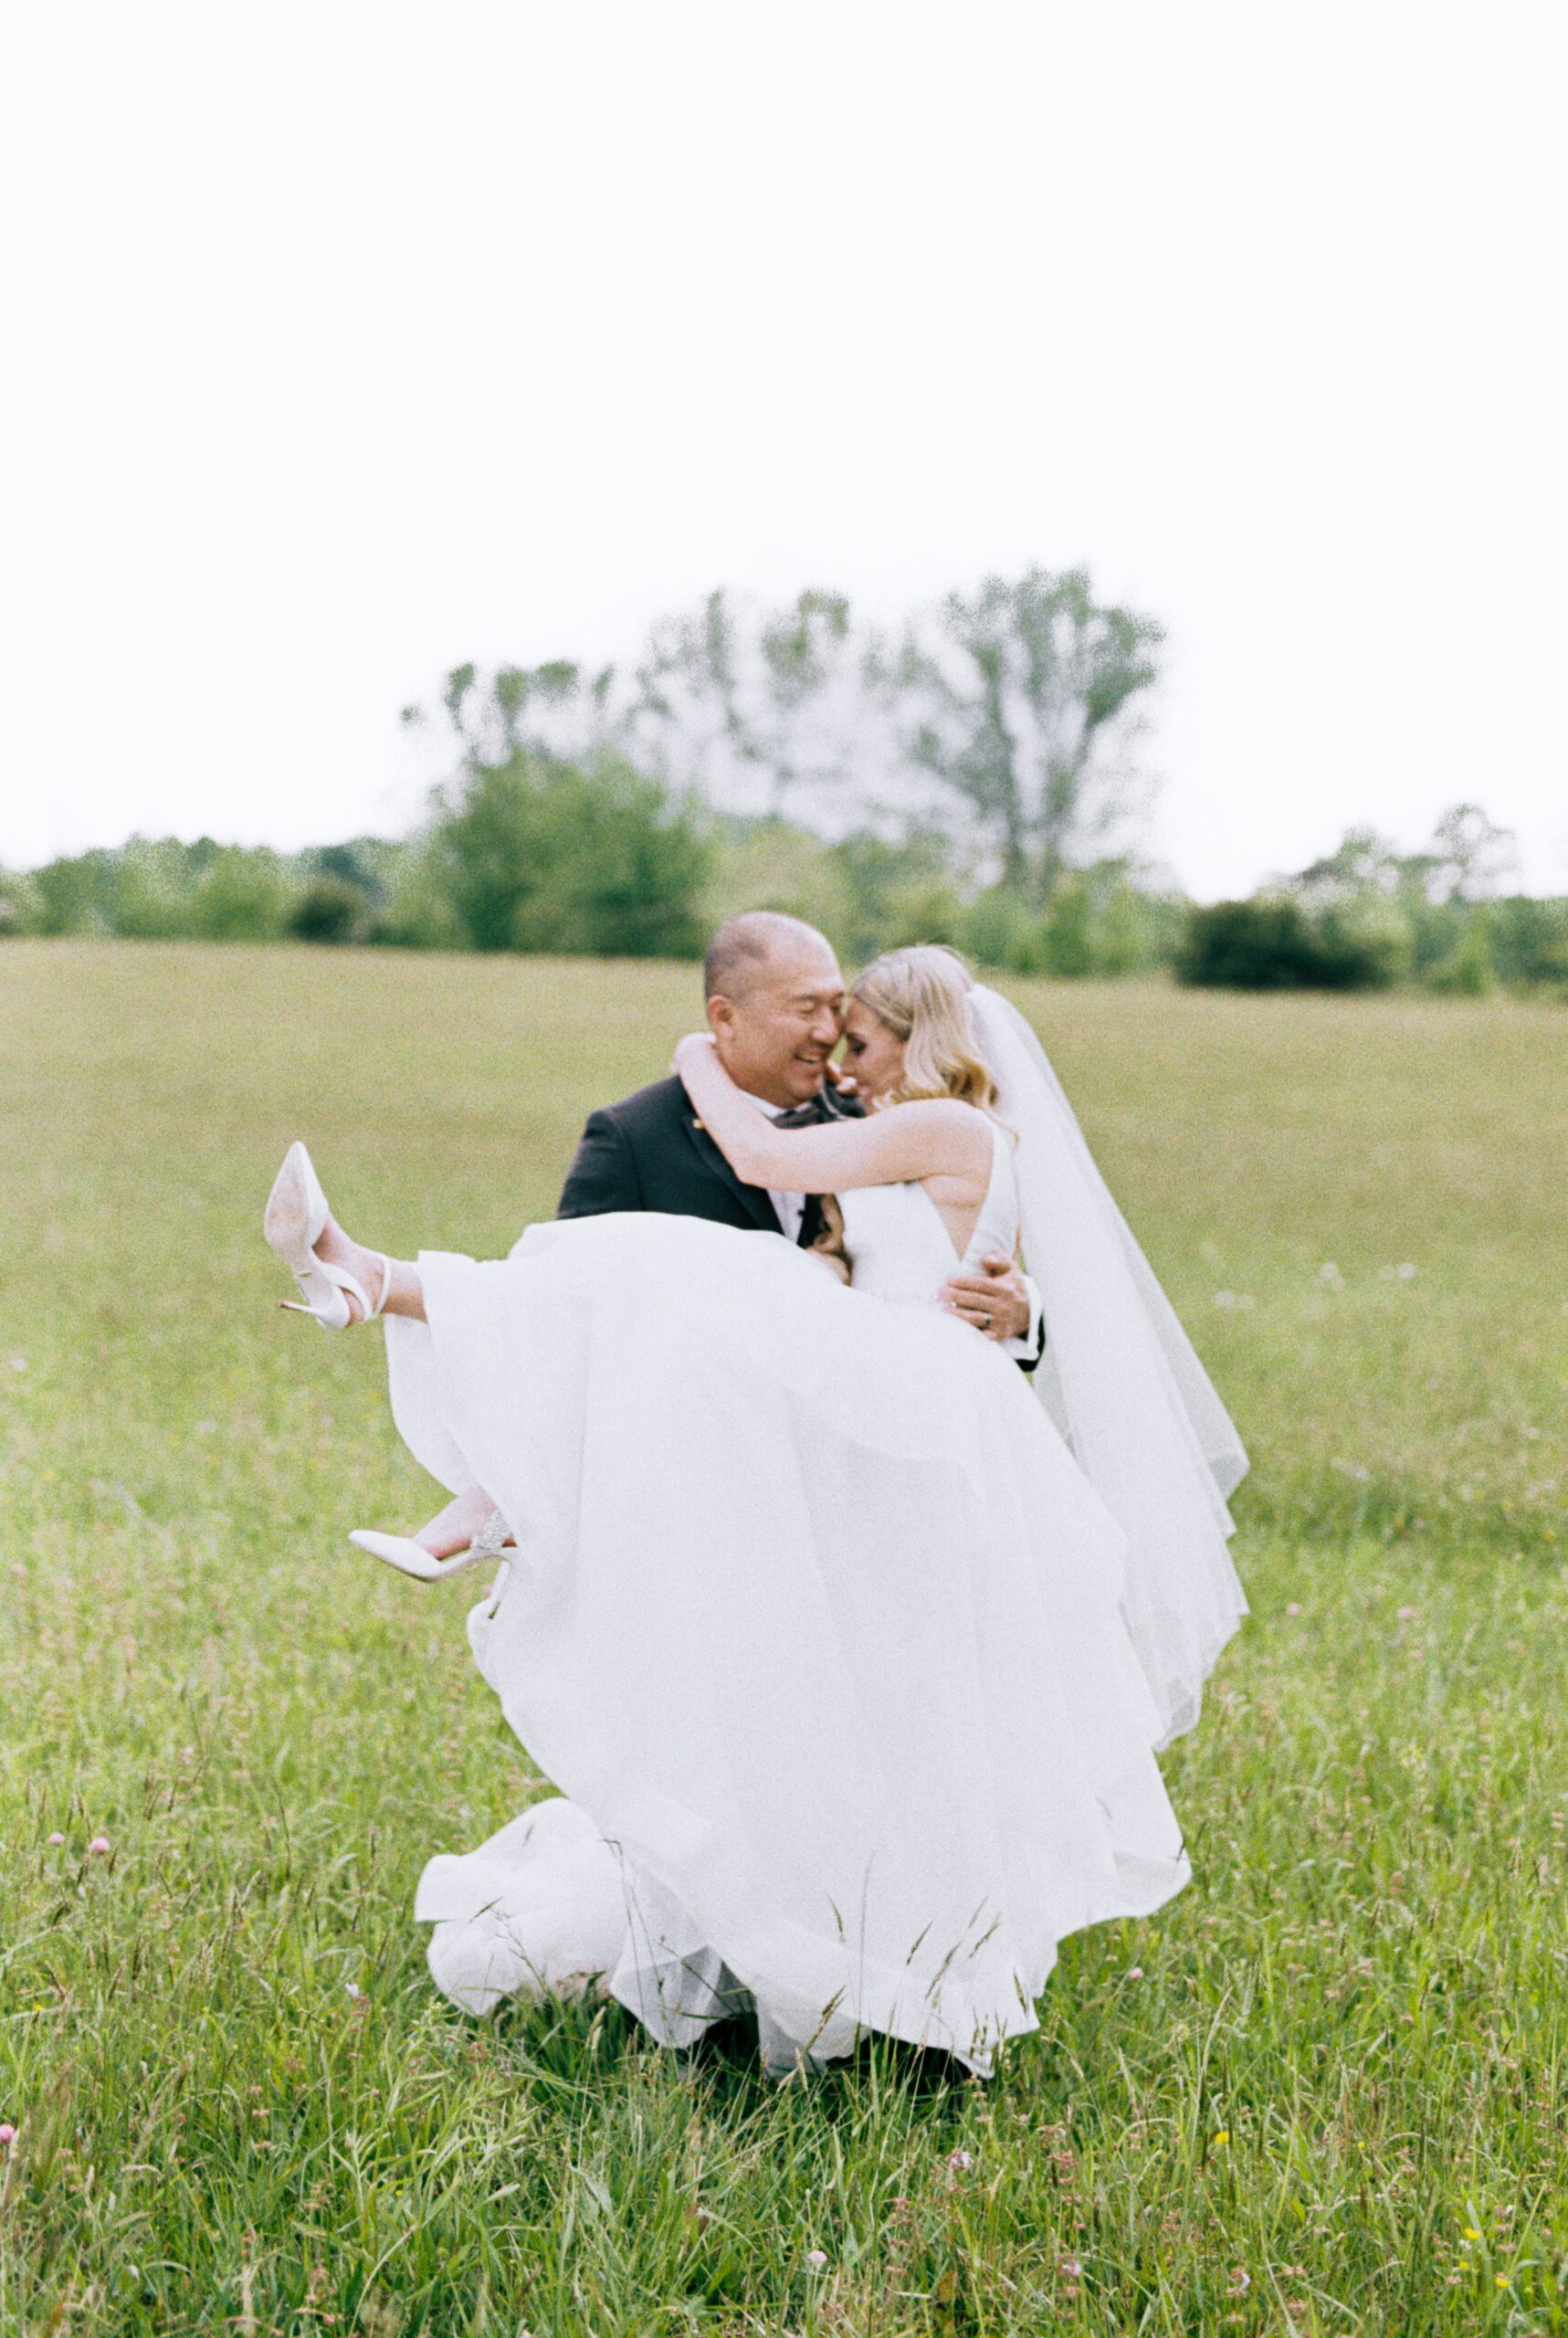 The groom picks up the bride in a field in Mentone, Alabama